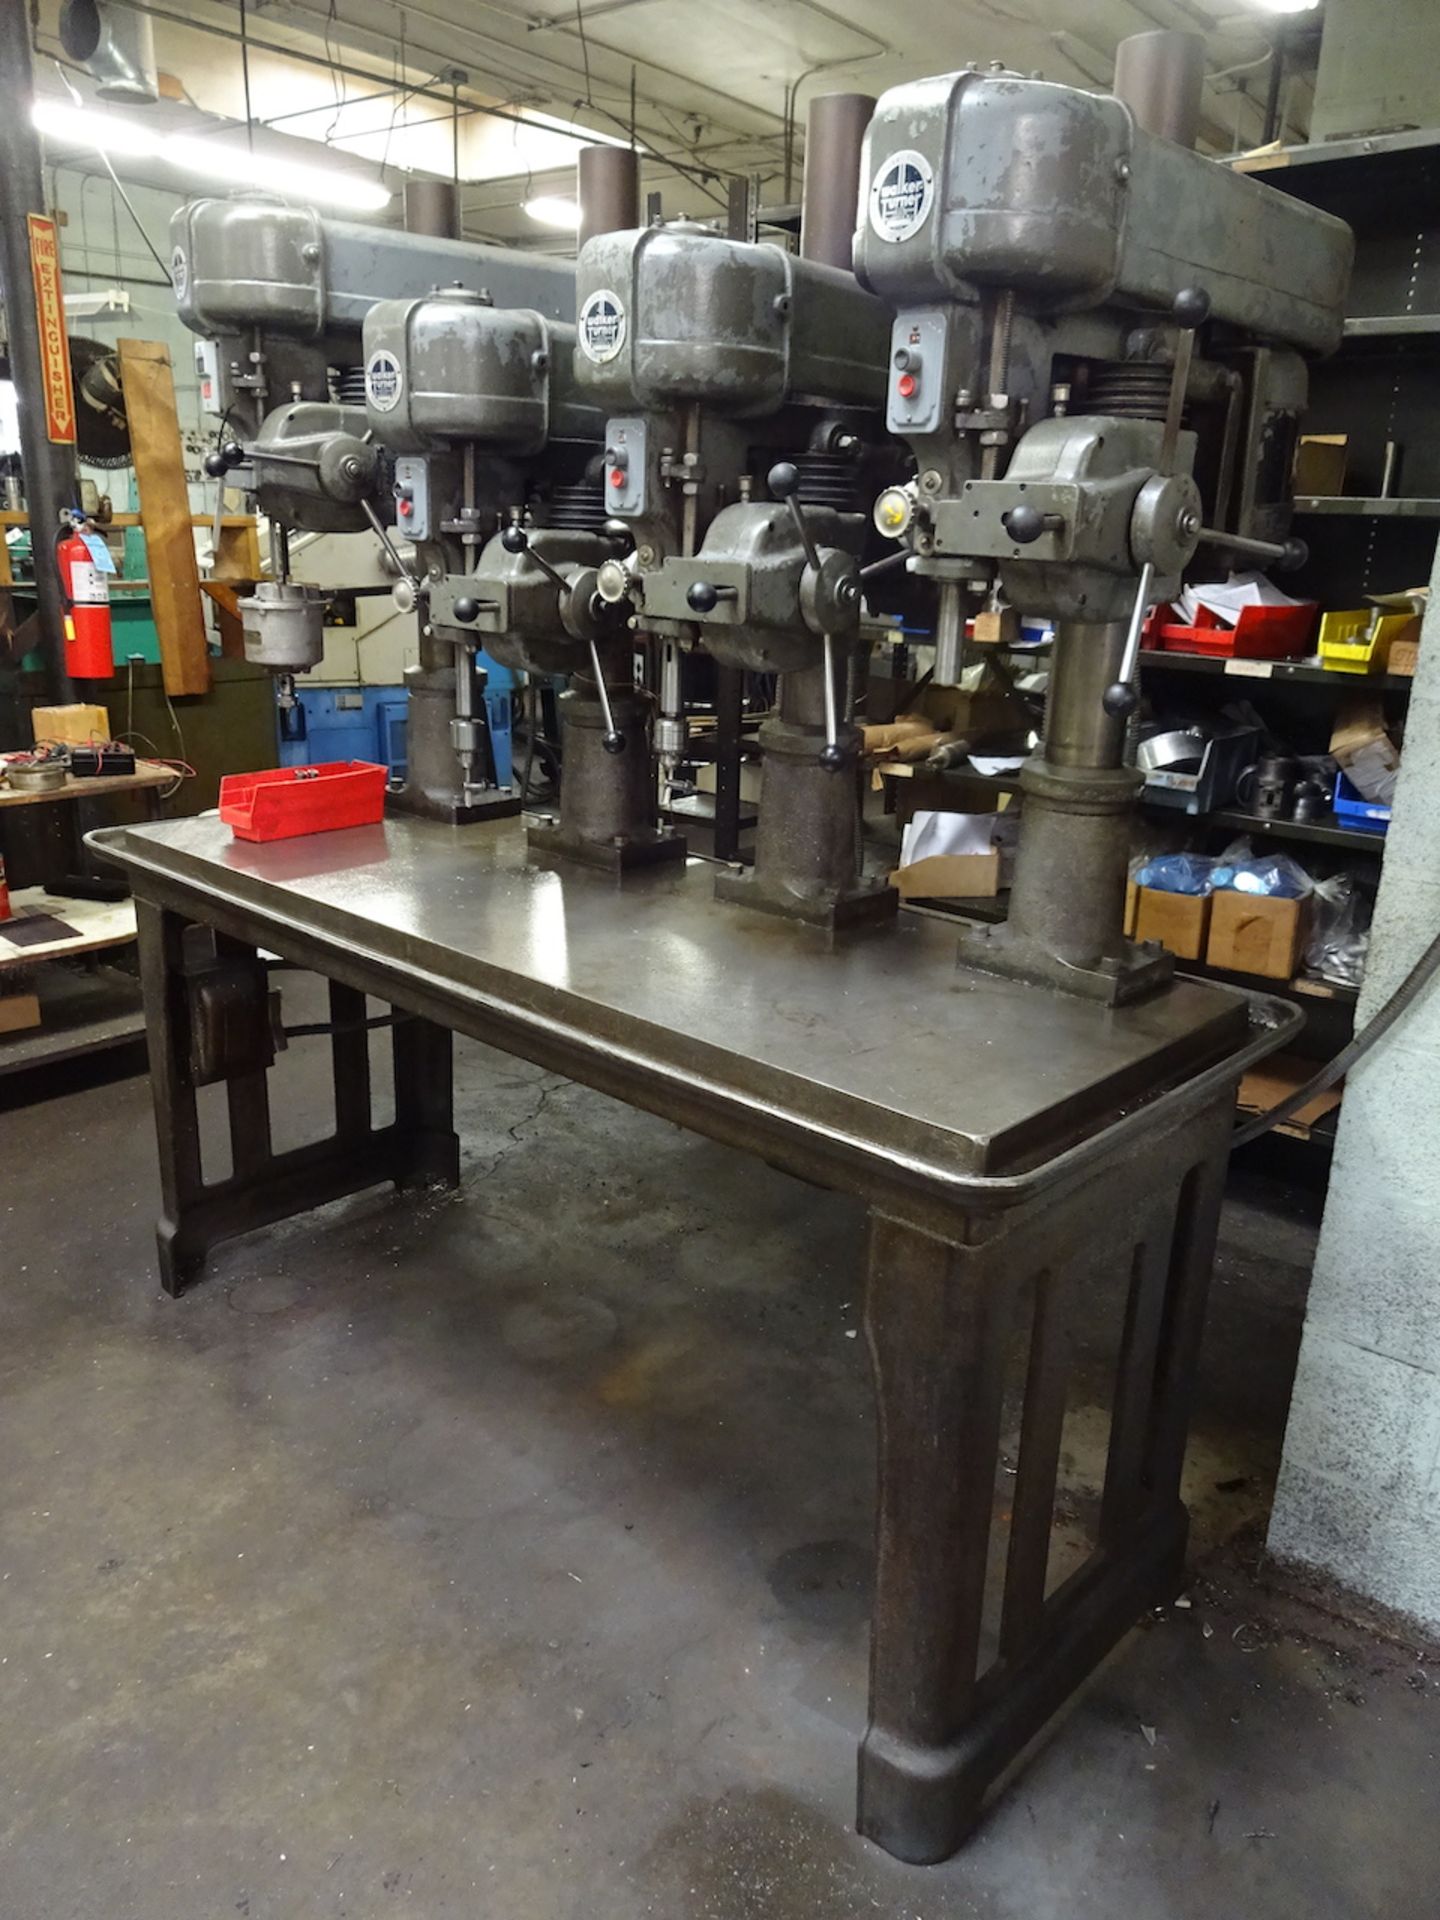 Walker Turner 18 in. 4-Spindle Production Drill, 70 in. x 24 in. Production Table, 1 HP Spindles - Image 2 of 6